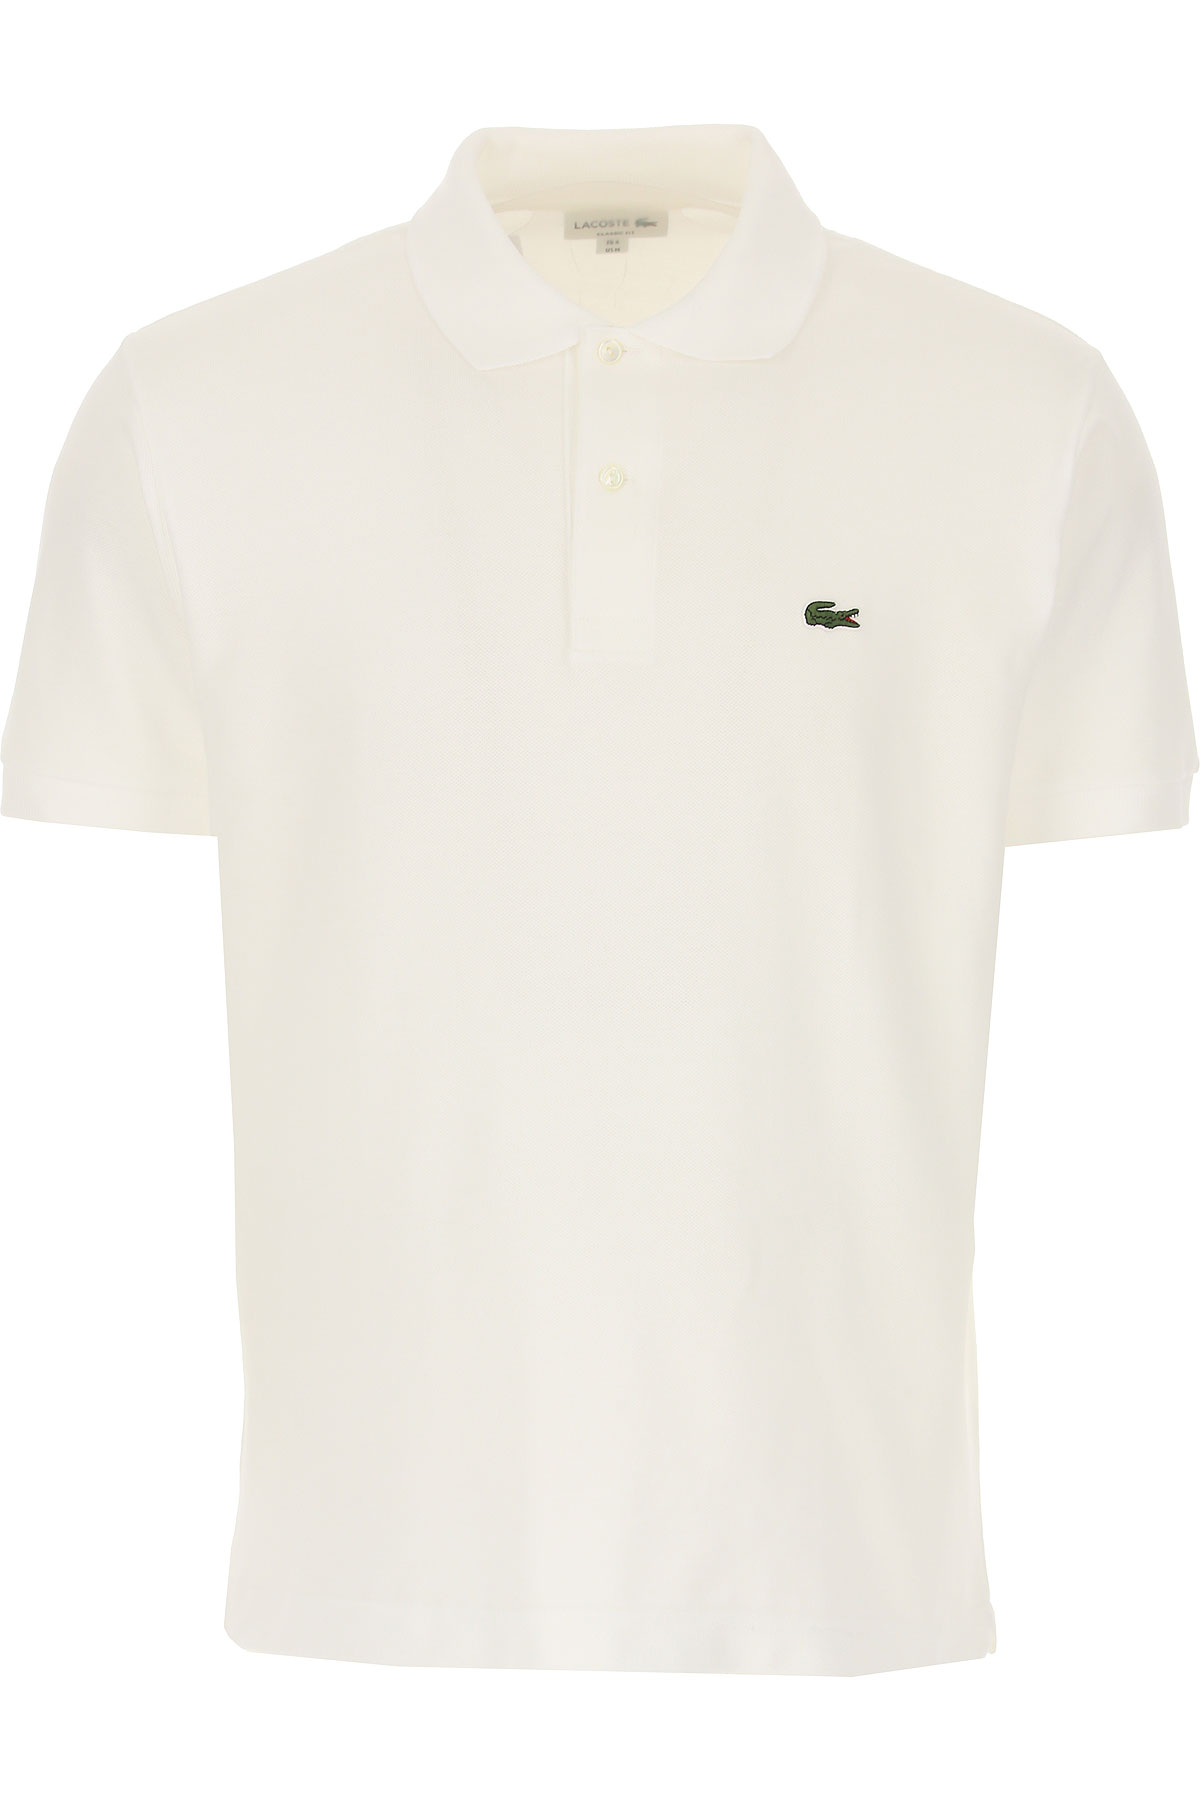 Mens Clothing Lacoste, Style code: 1212-001-